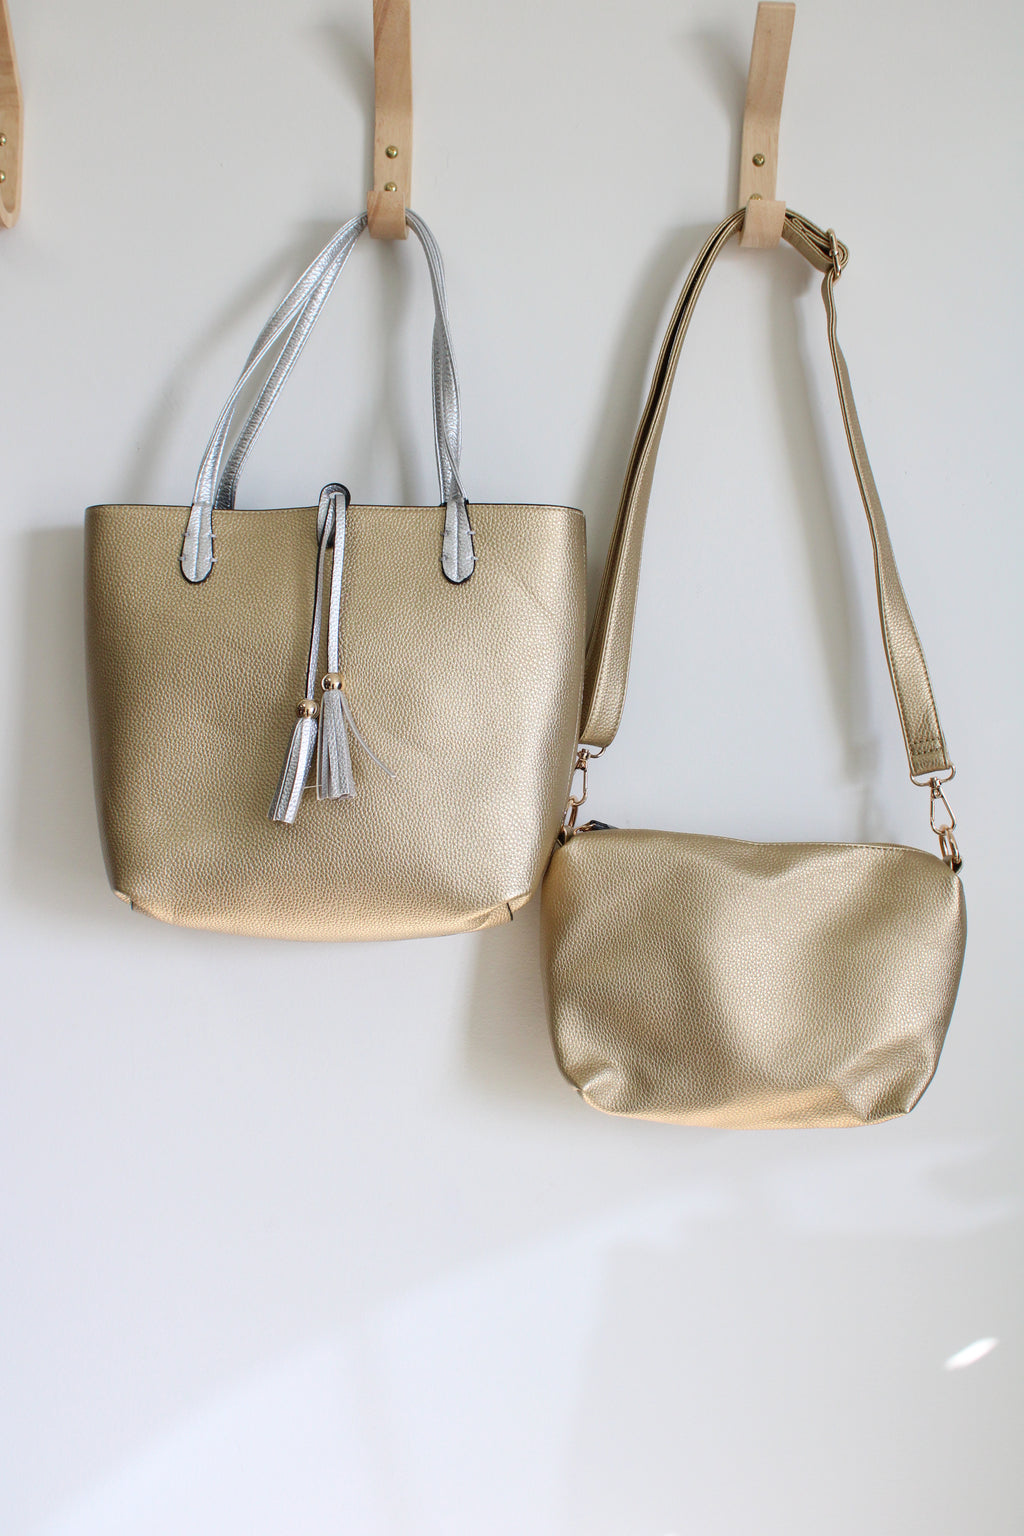 NEW Stein Mart Two-Toned Gold Silver Tote & Crossbody Purse Set